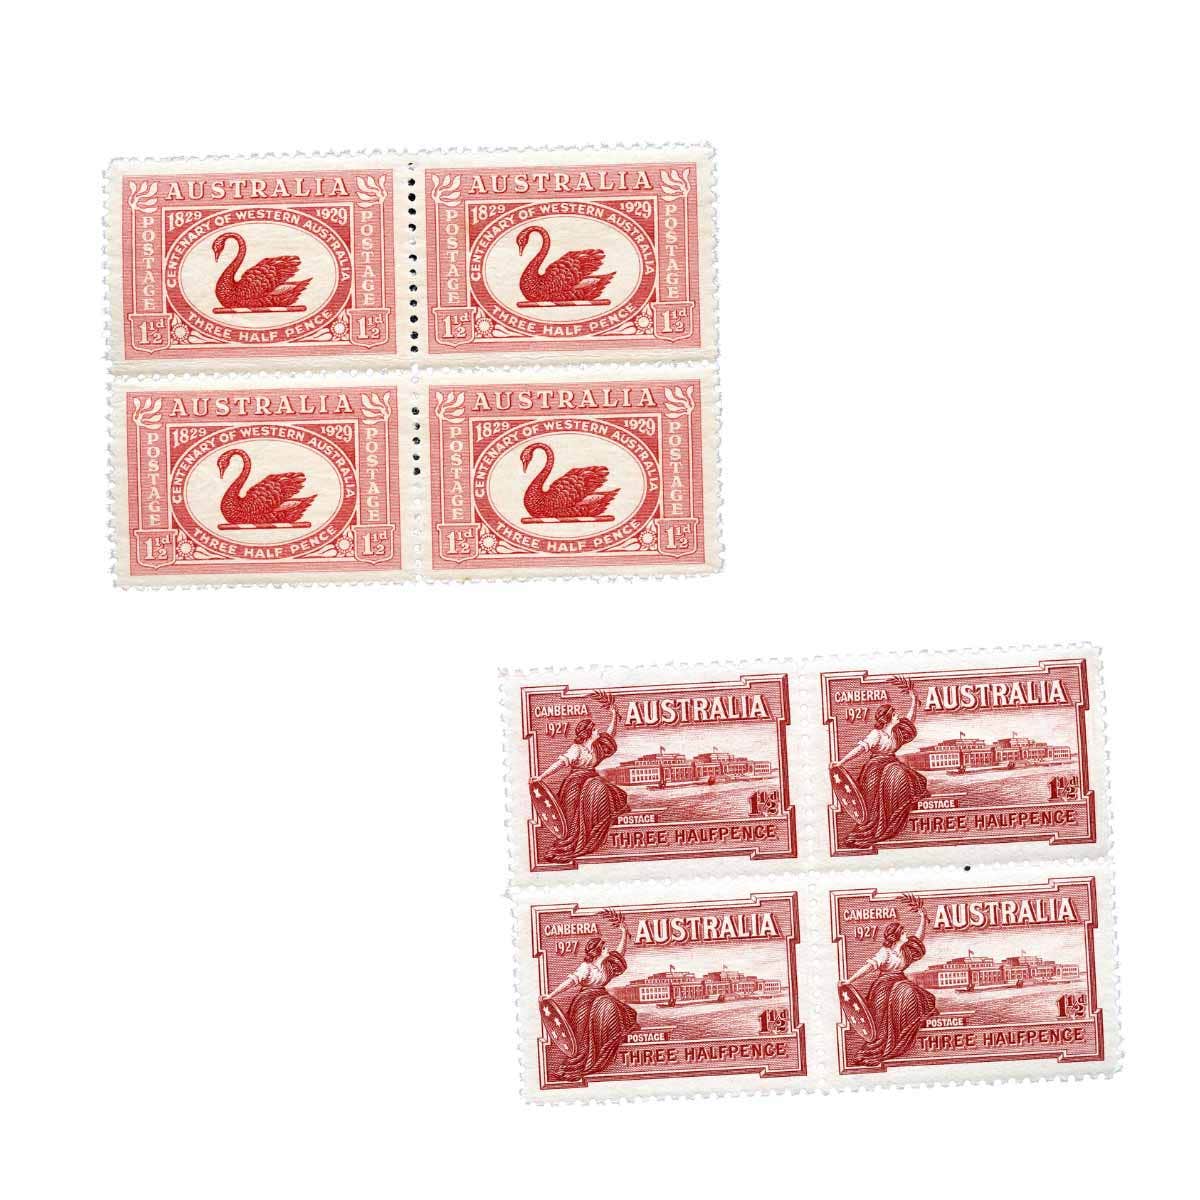 1927 1½d Canberra & 1929 1½d Centenary of Western Australia Blocks of 4 MUH (8 stamps)